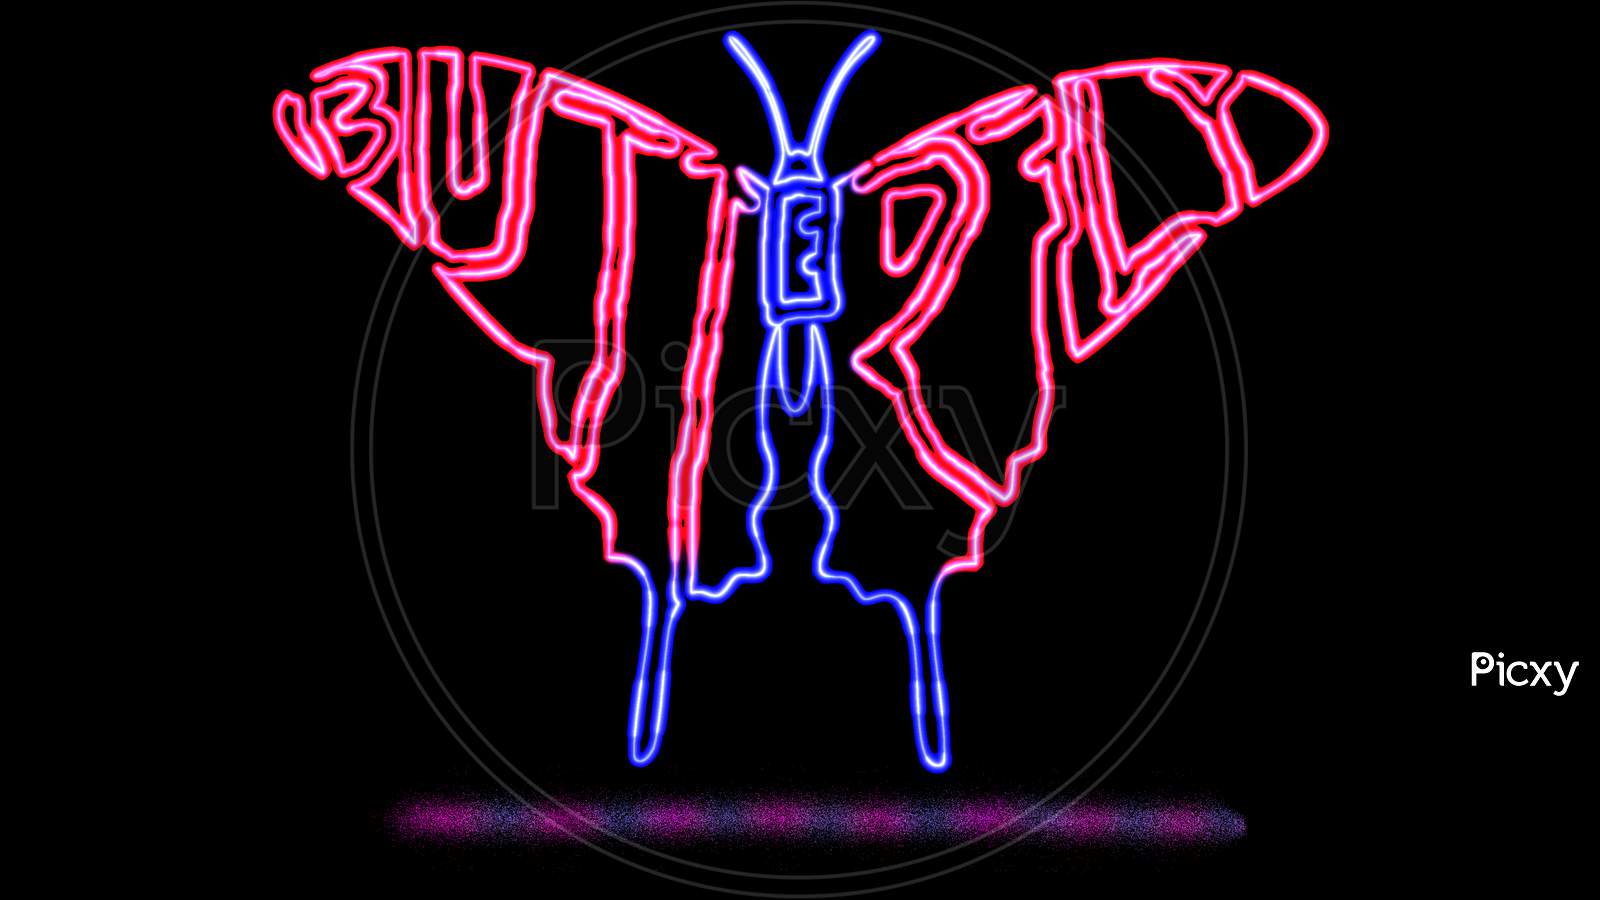 Text Butterfly Is Written In The Shape Of Butterfly With Neon Light Effect. Animal Text Outline With Neon Light Effect.